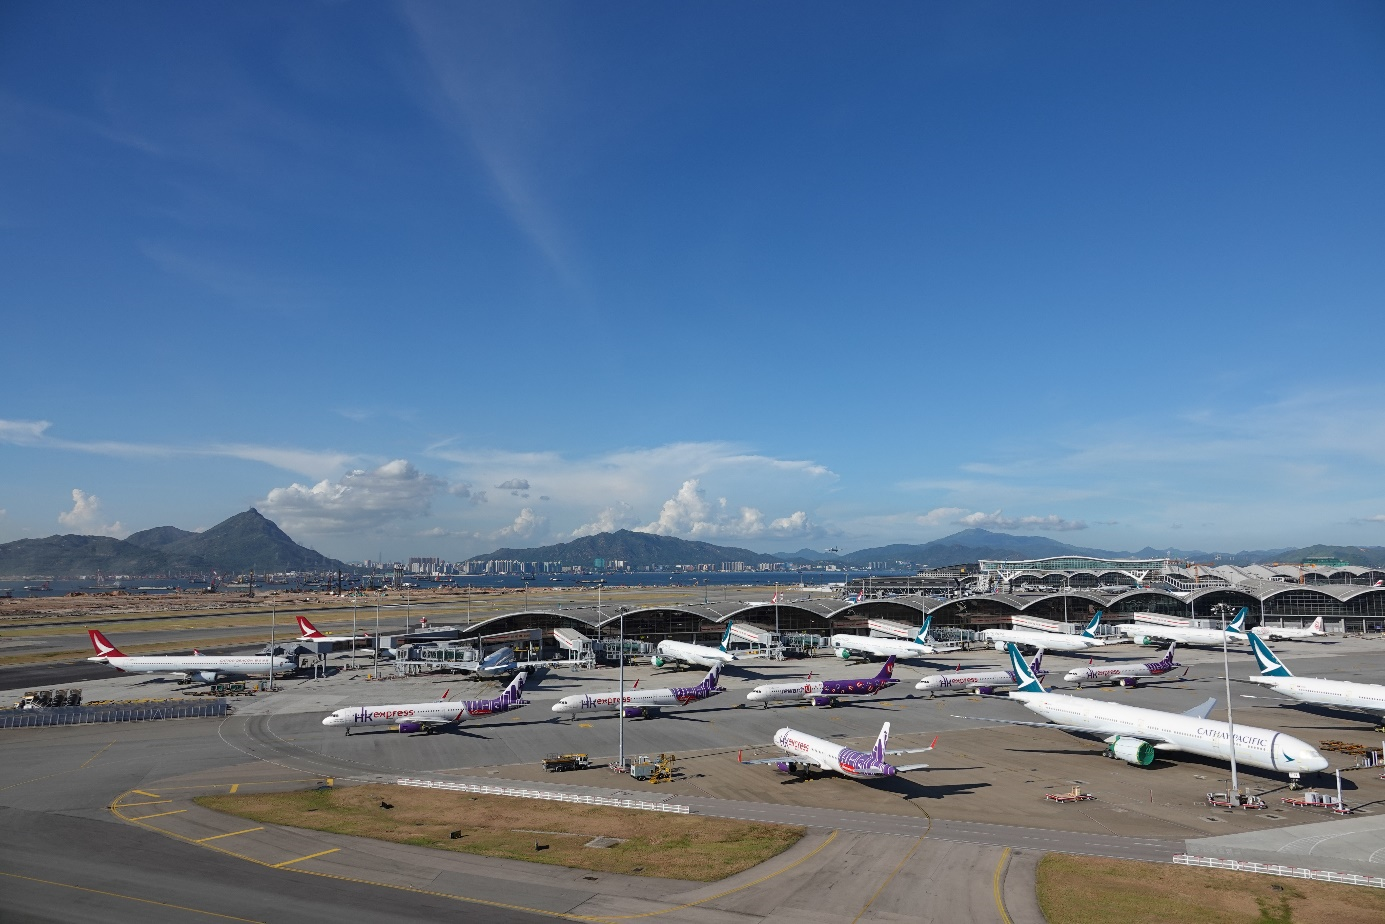 Figure 2: Aircrafts piling up on the apron of HKIA (Photo taken on 28 July 2020).